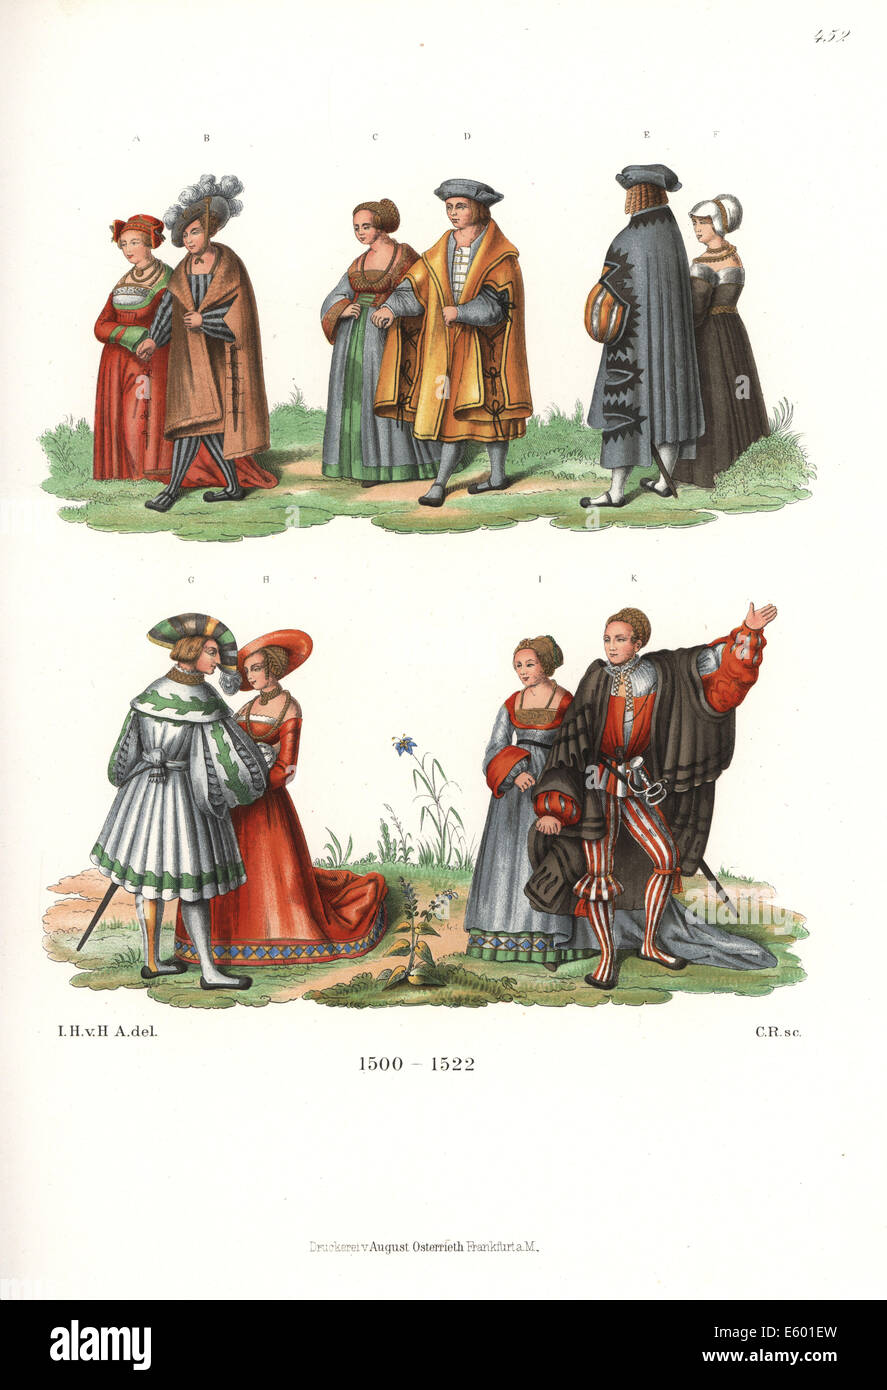 Luxurious fashions of the nobility of Augsburg in the early 16th century. Stock Photo